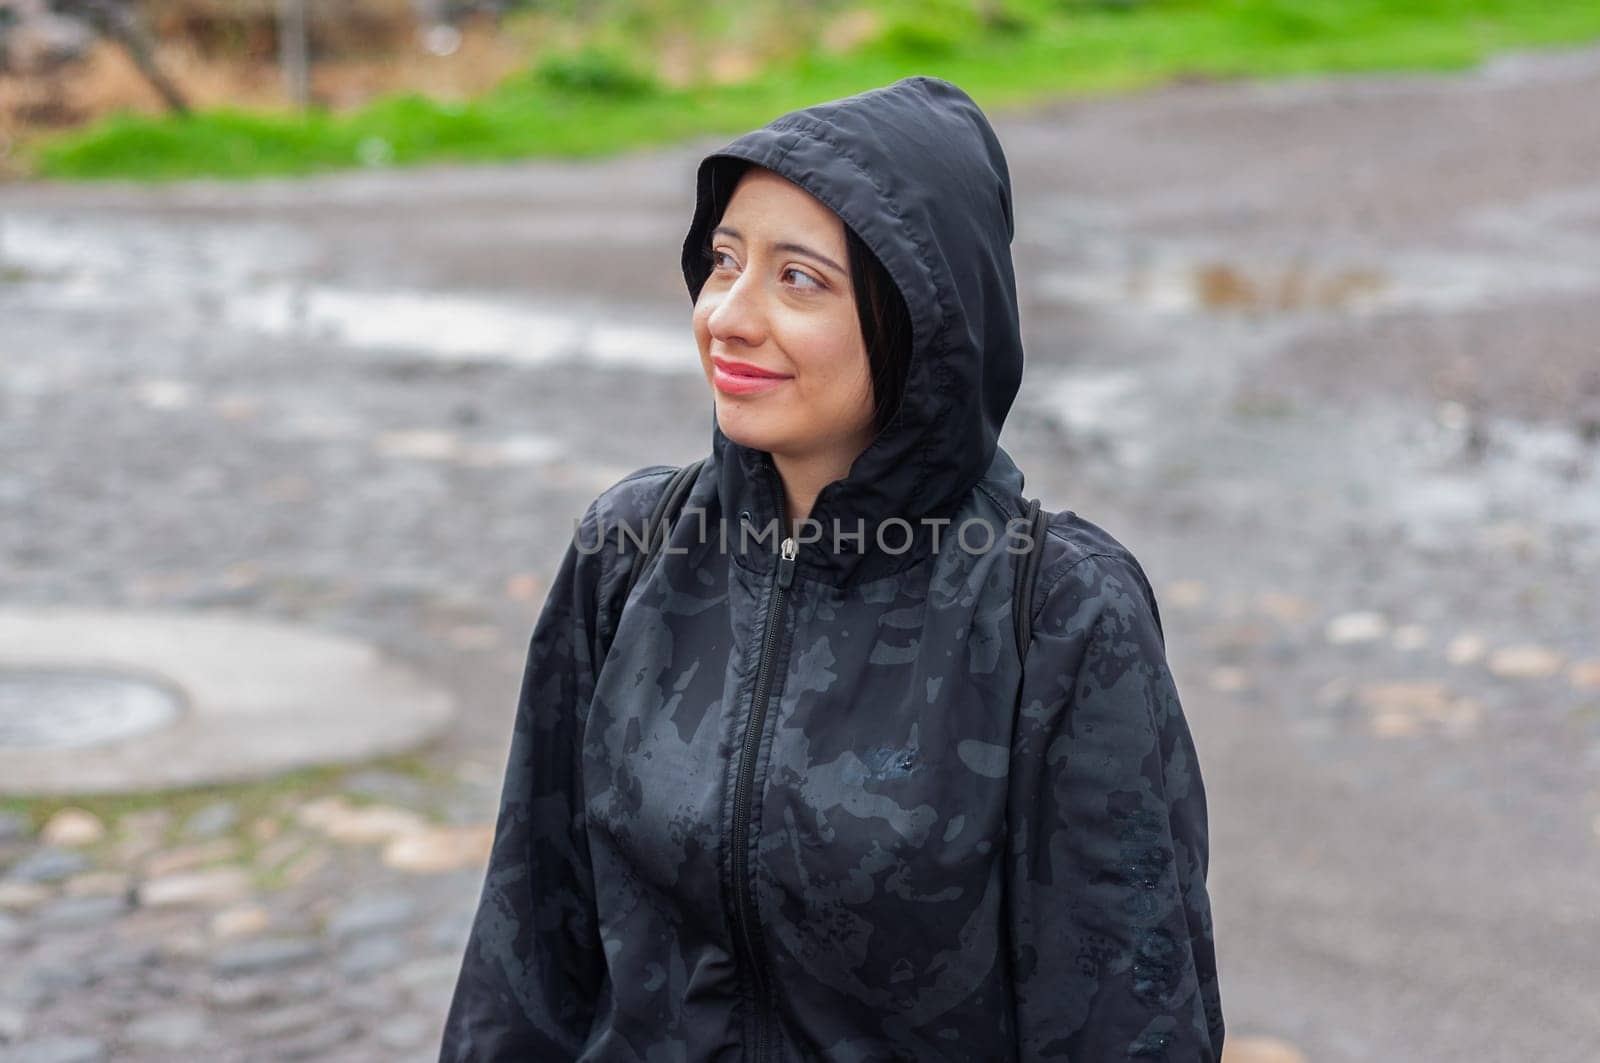 young tourist on a rainy day in a black hooded jacket looking around with a blank stare and a small smile. tourism day. High quality photo